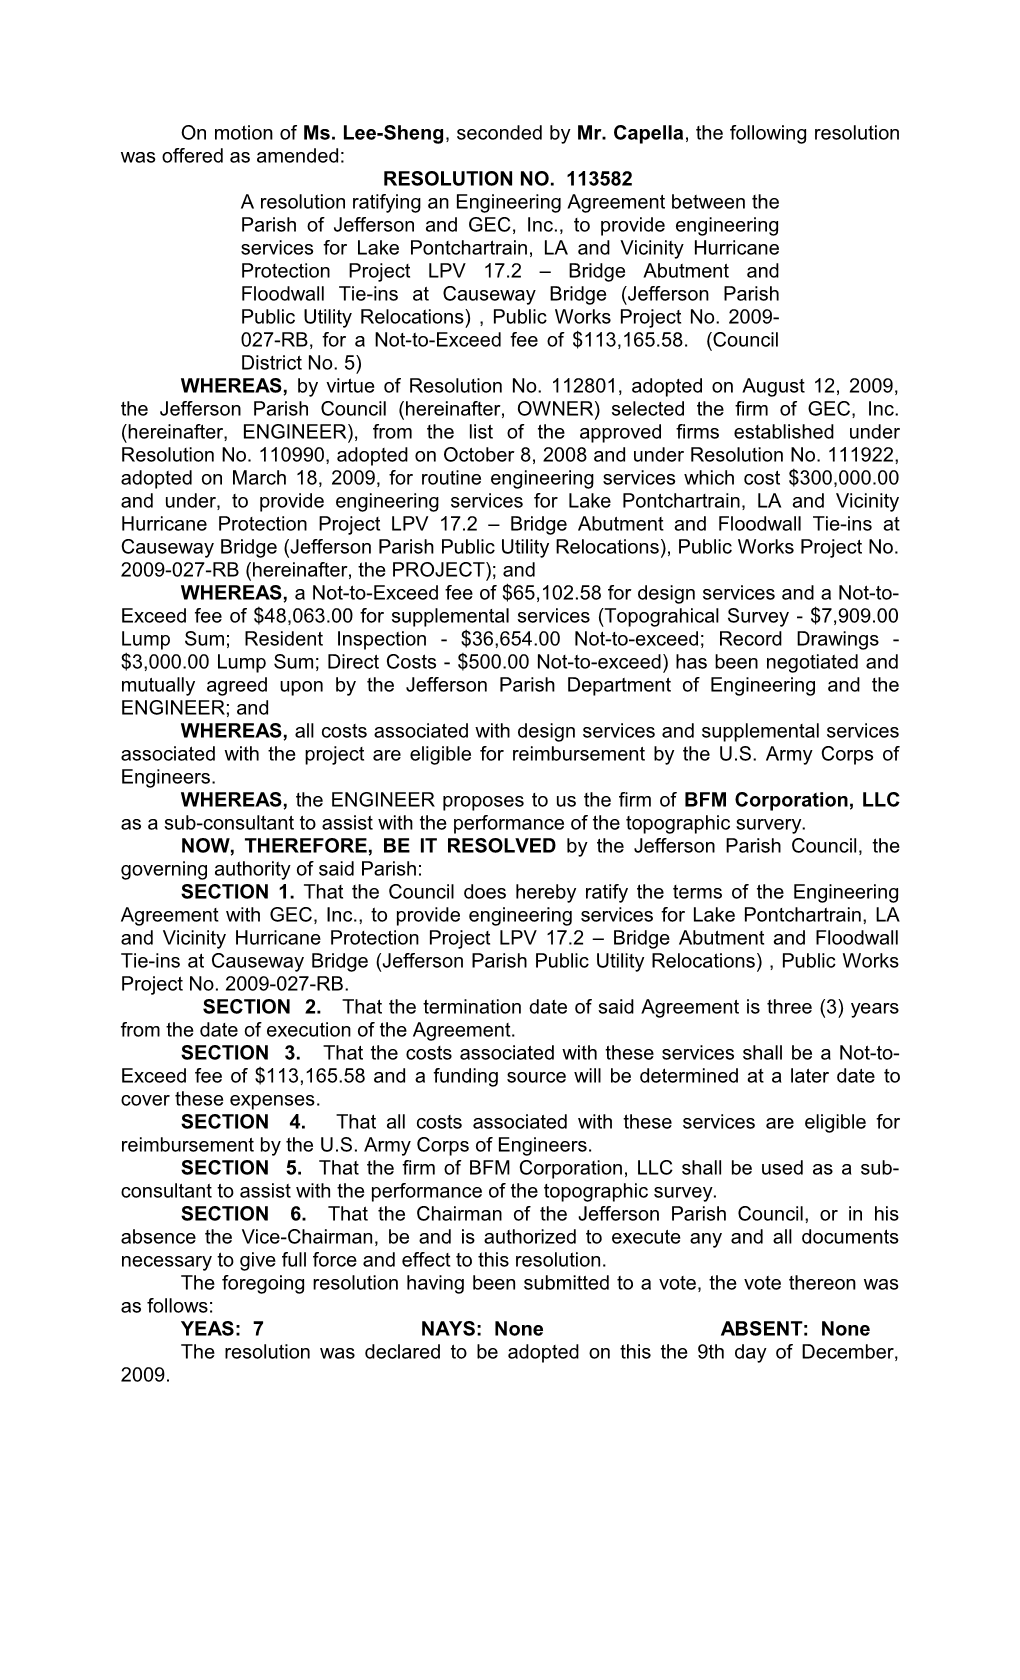 On Motion of Ms. Lee-Sheng, Seconded by Mr. Capella , the Following Resolution Was Offered